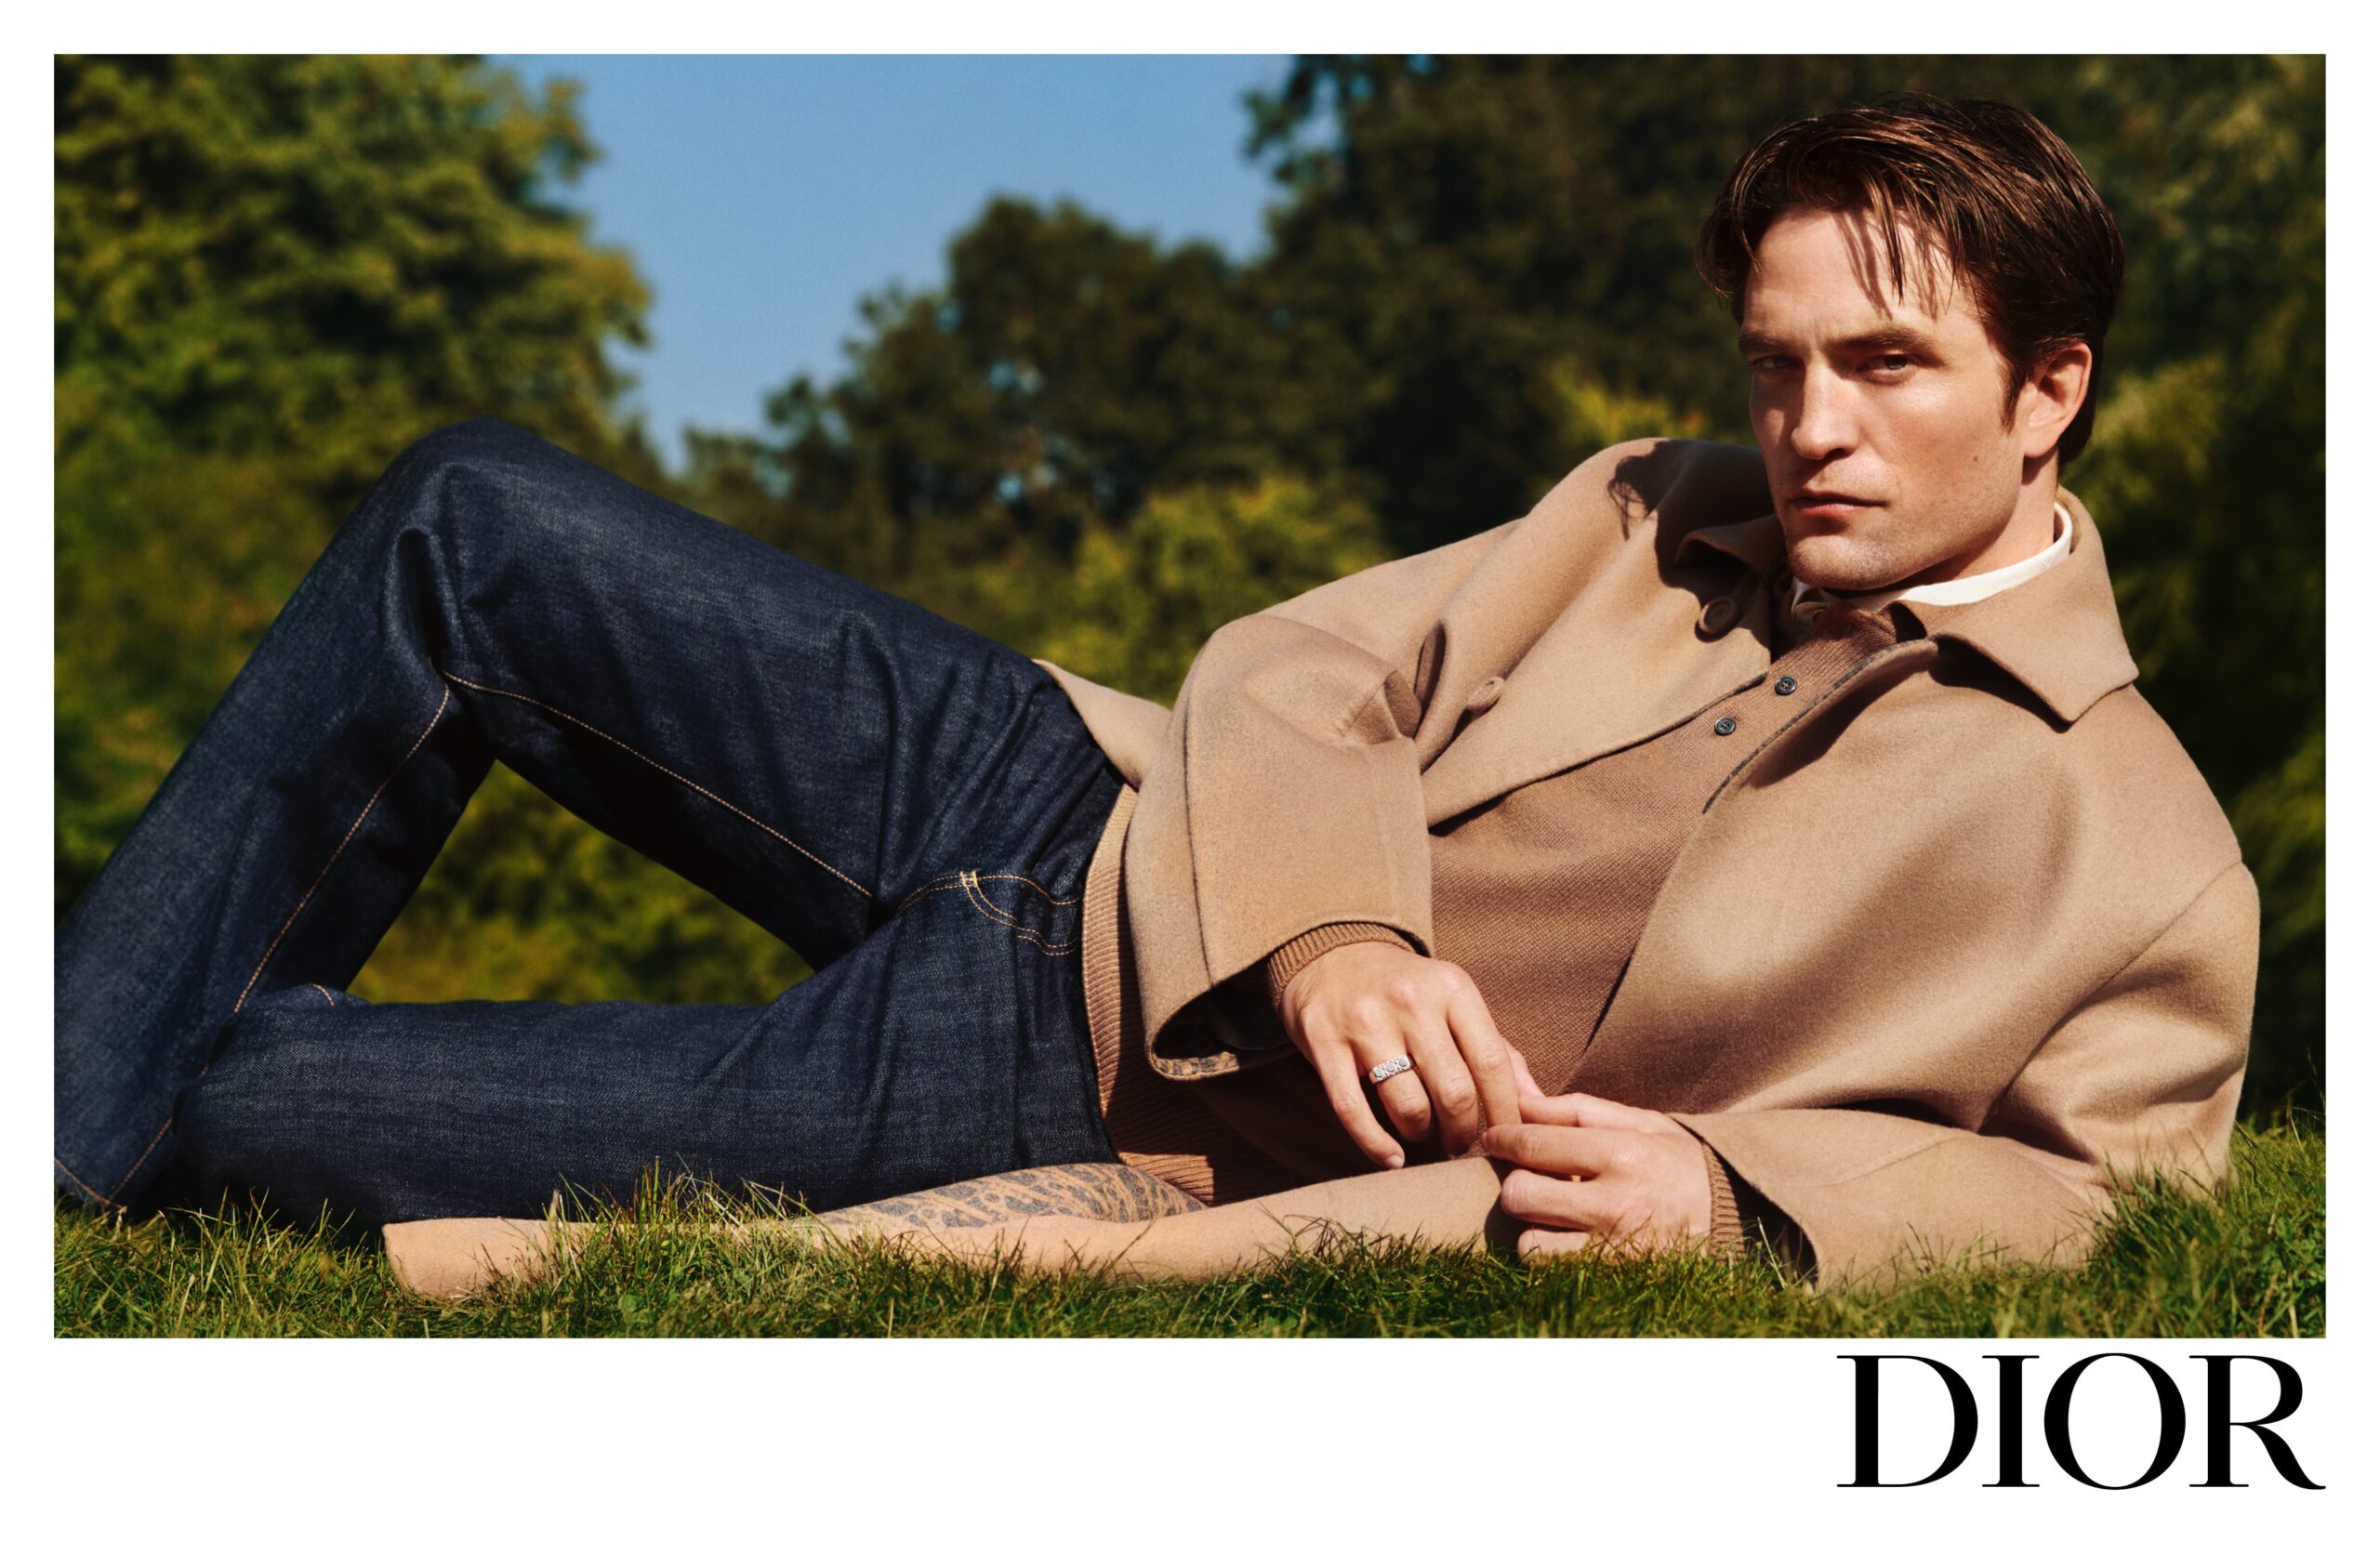 Robert Pattinson lounges on the grass in a DIOR campaign, wearing a tan jacket and blue jeans, conveying a relaxed yet sophisticated style.